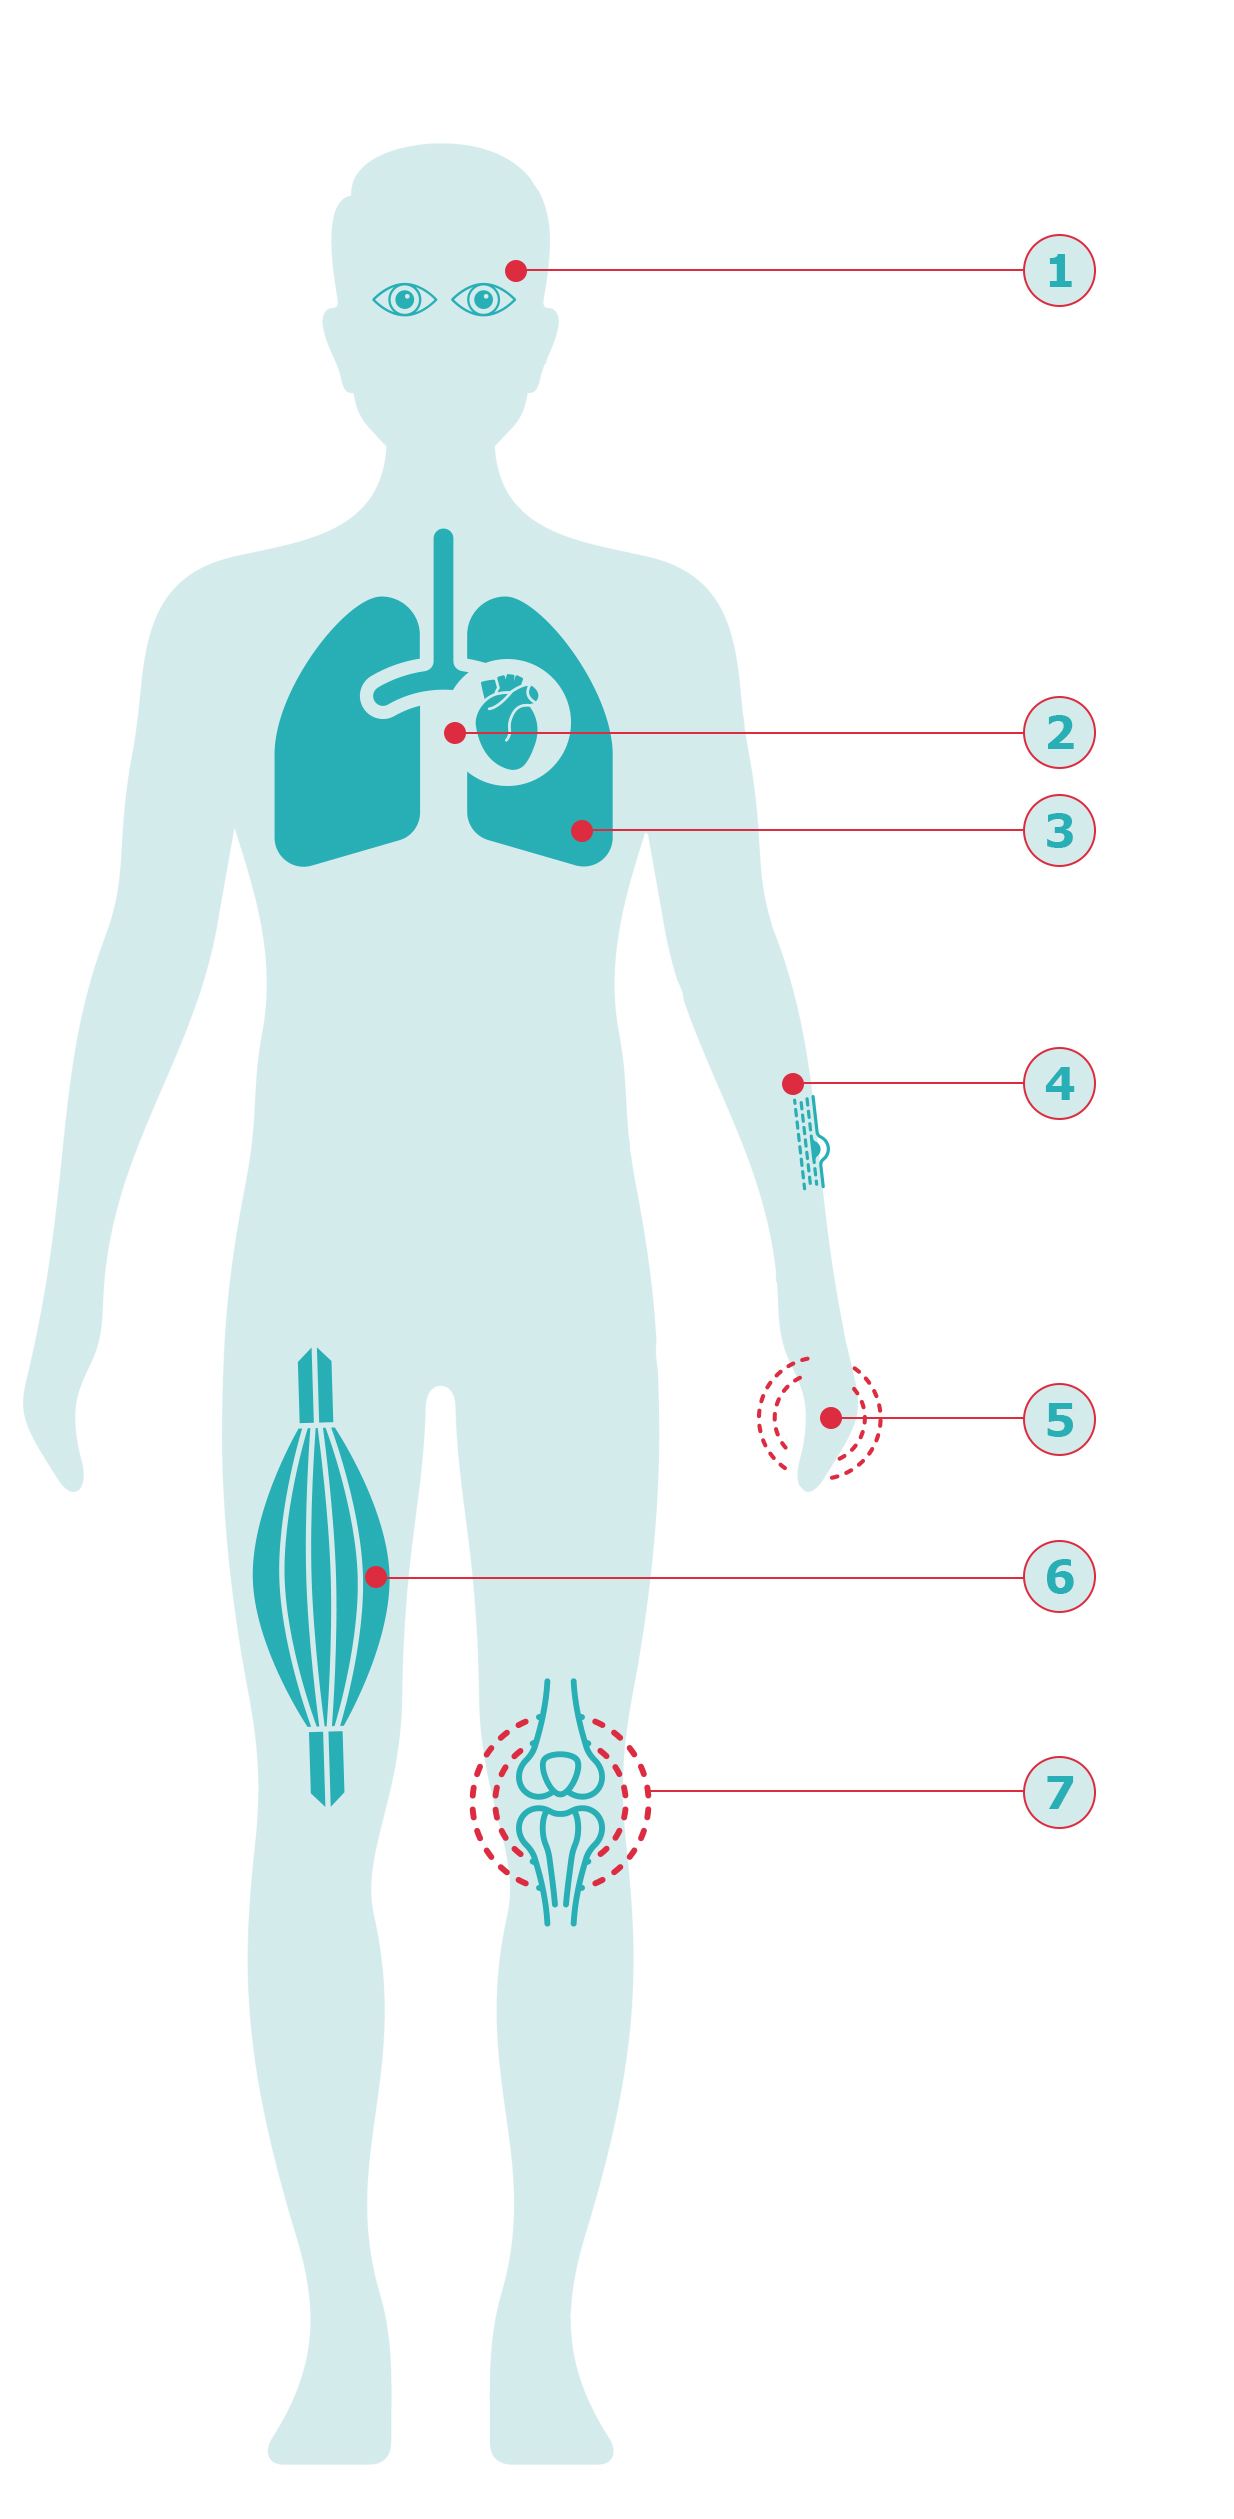 Diagram of the human body and a number of organs